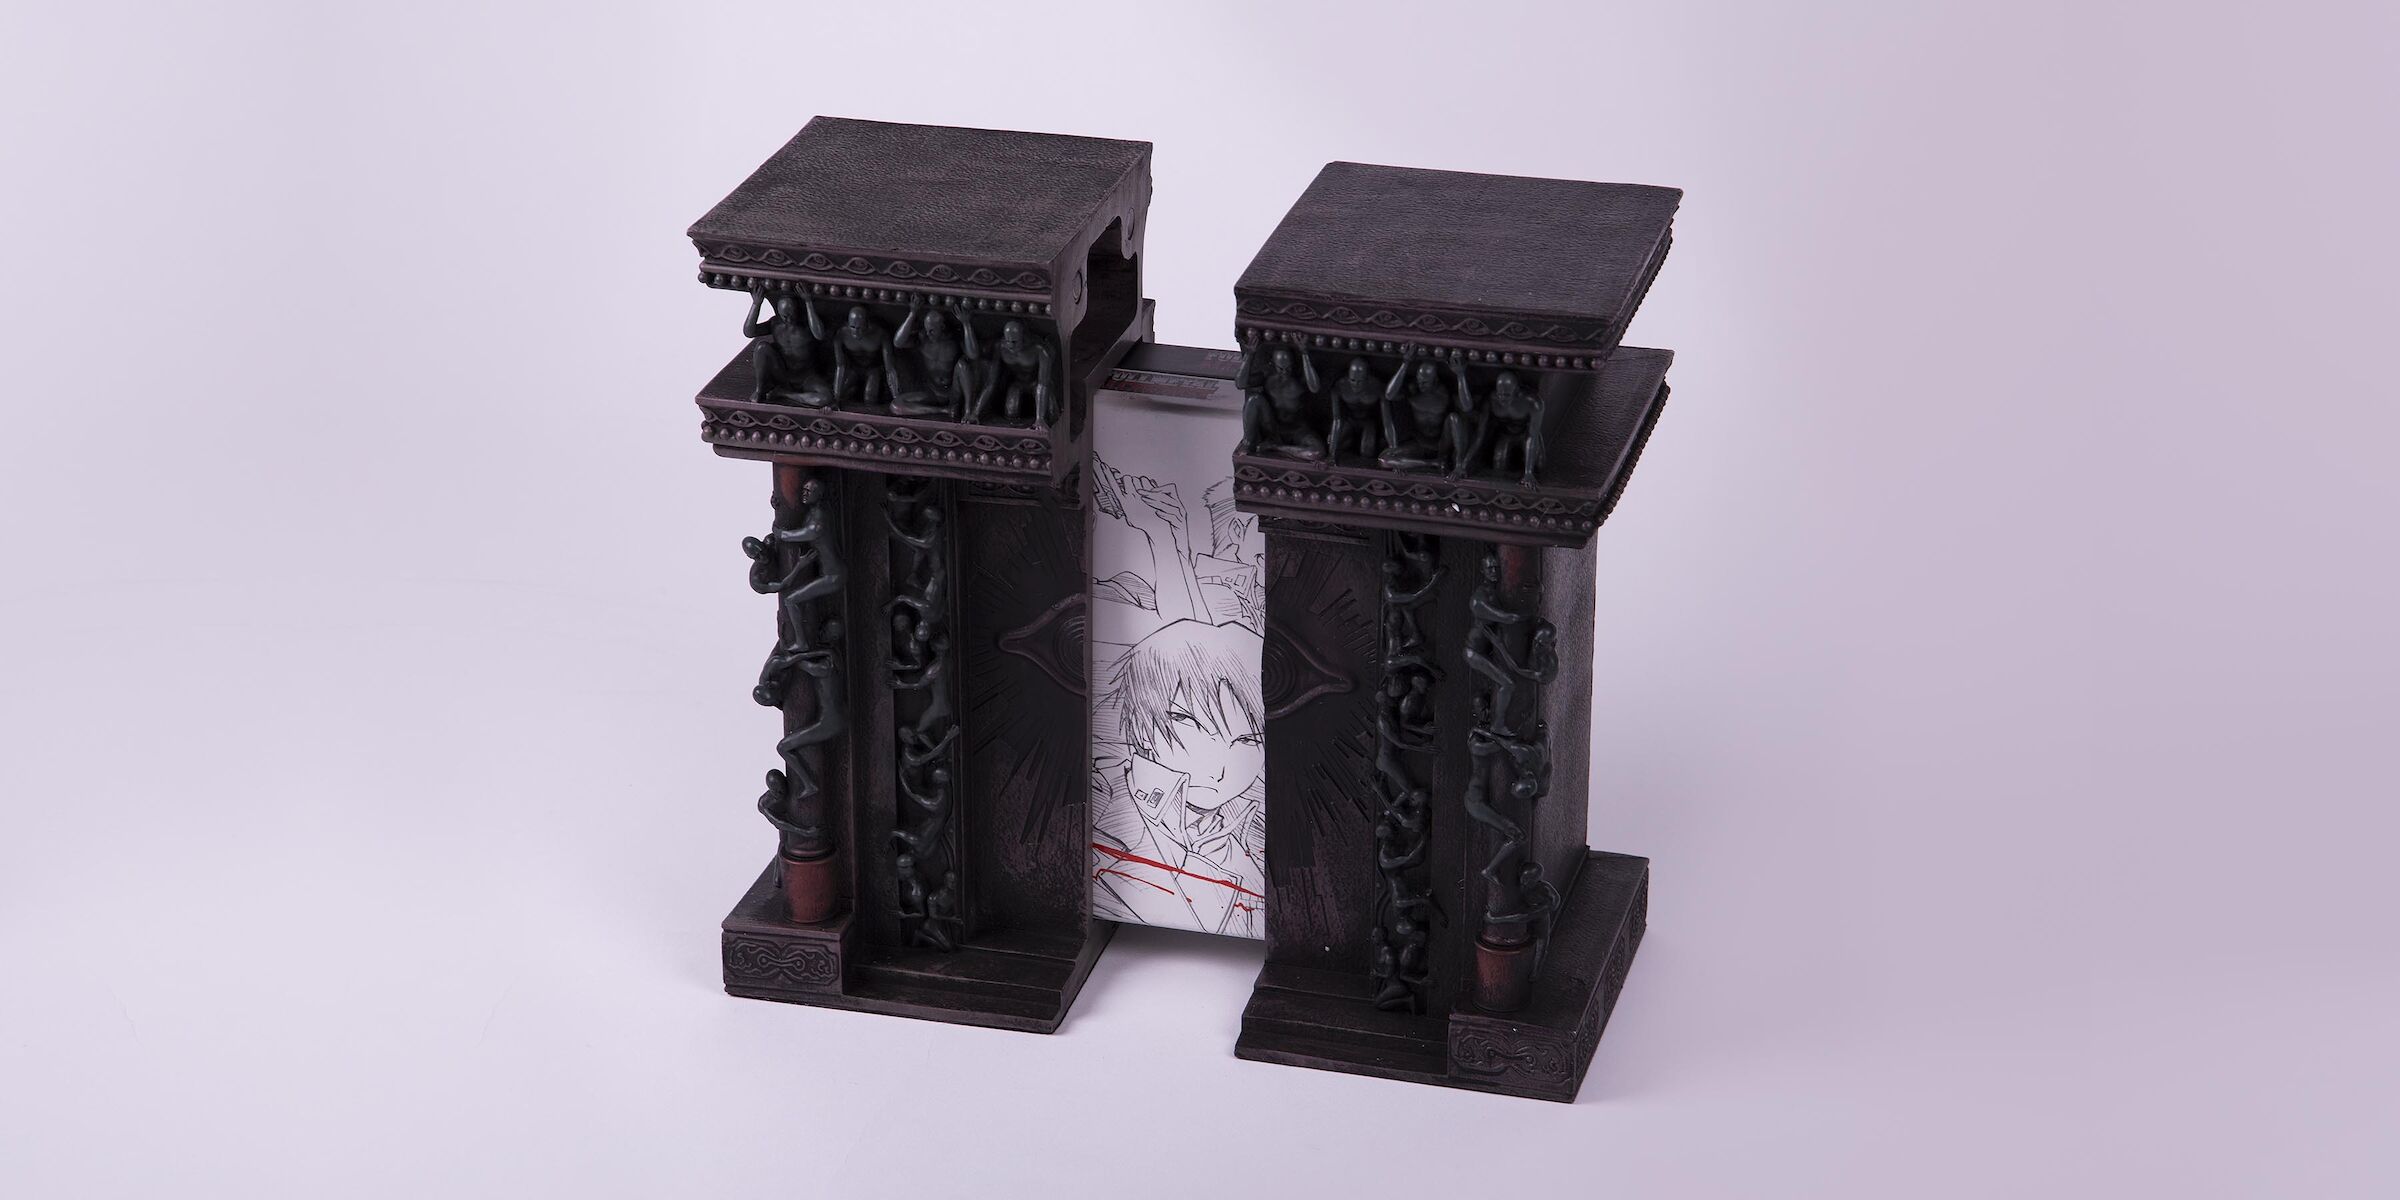 Full Metal Alchemist unique packaging replica of The Gate with bespoke book featuring illustrations